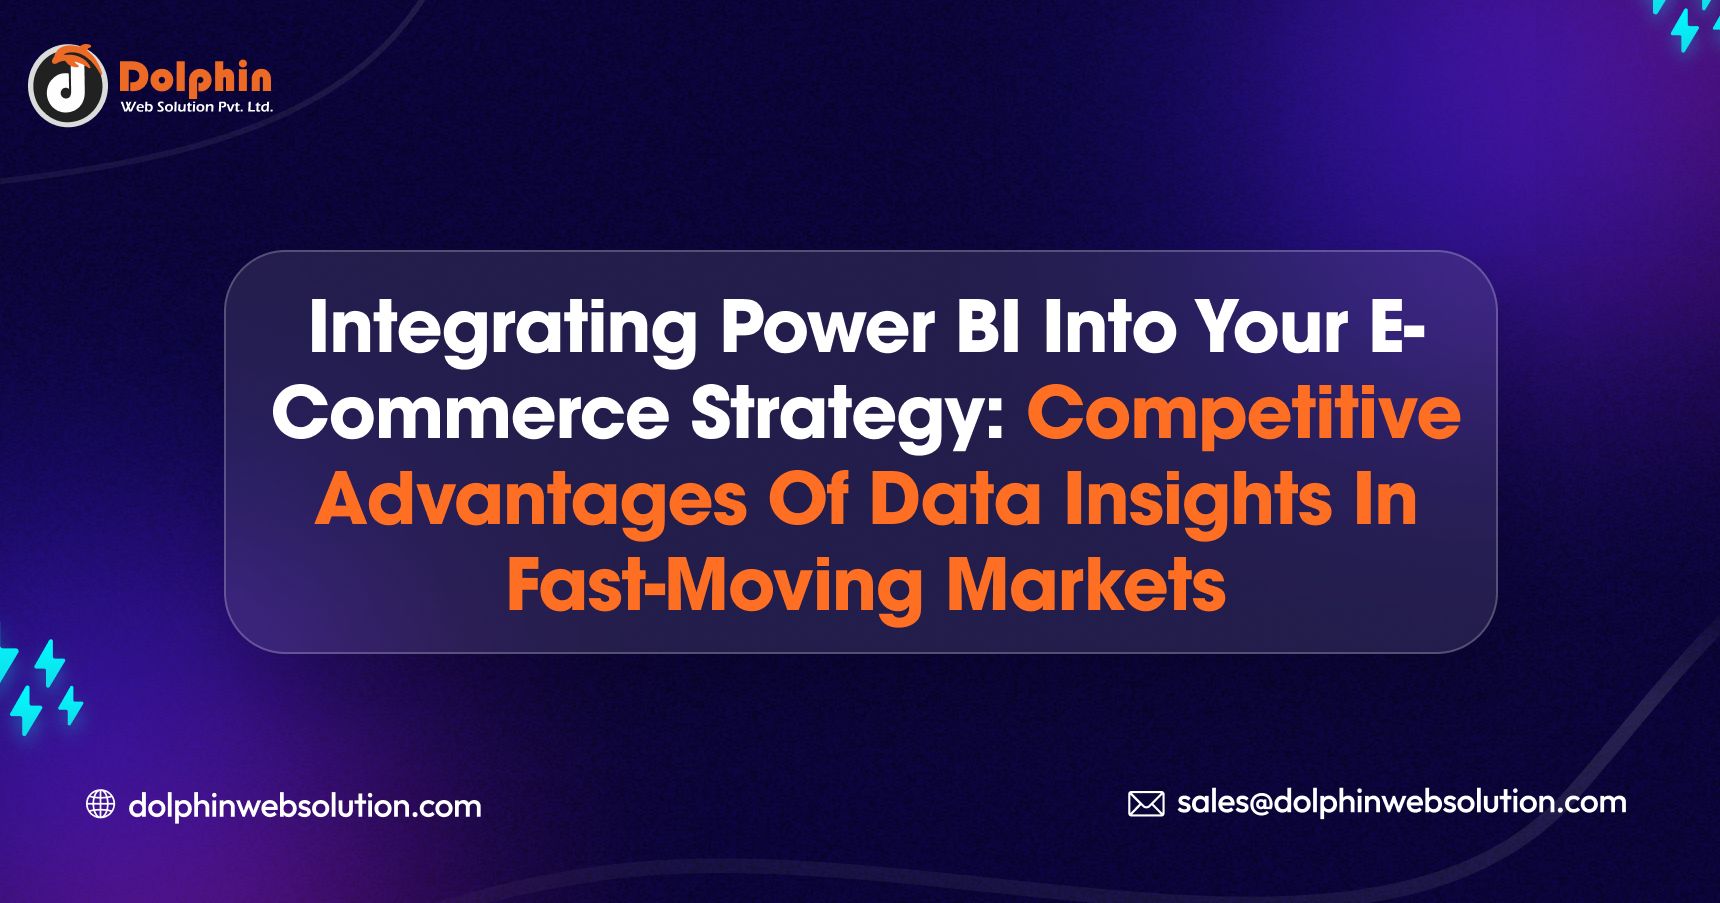 Integrating Power BI into Your E-Commerce Strategy